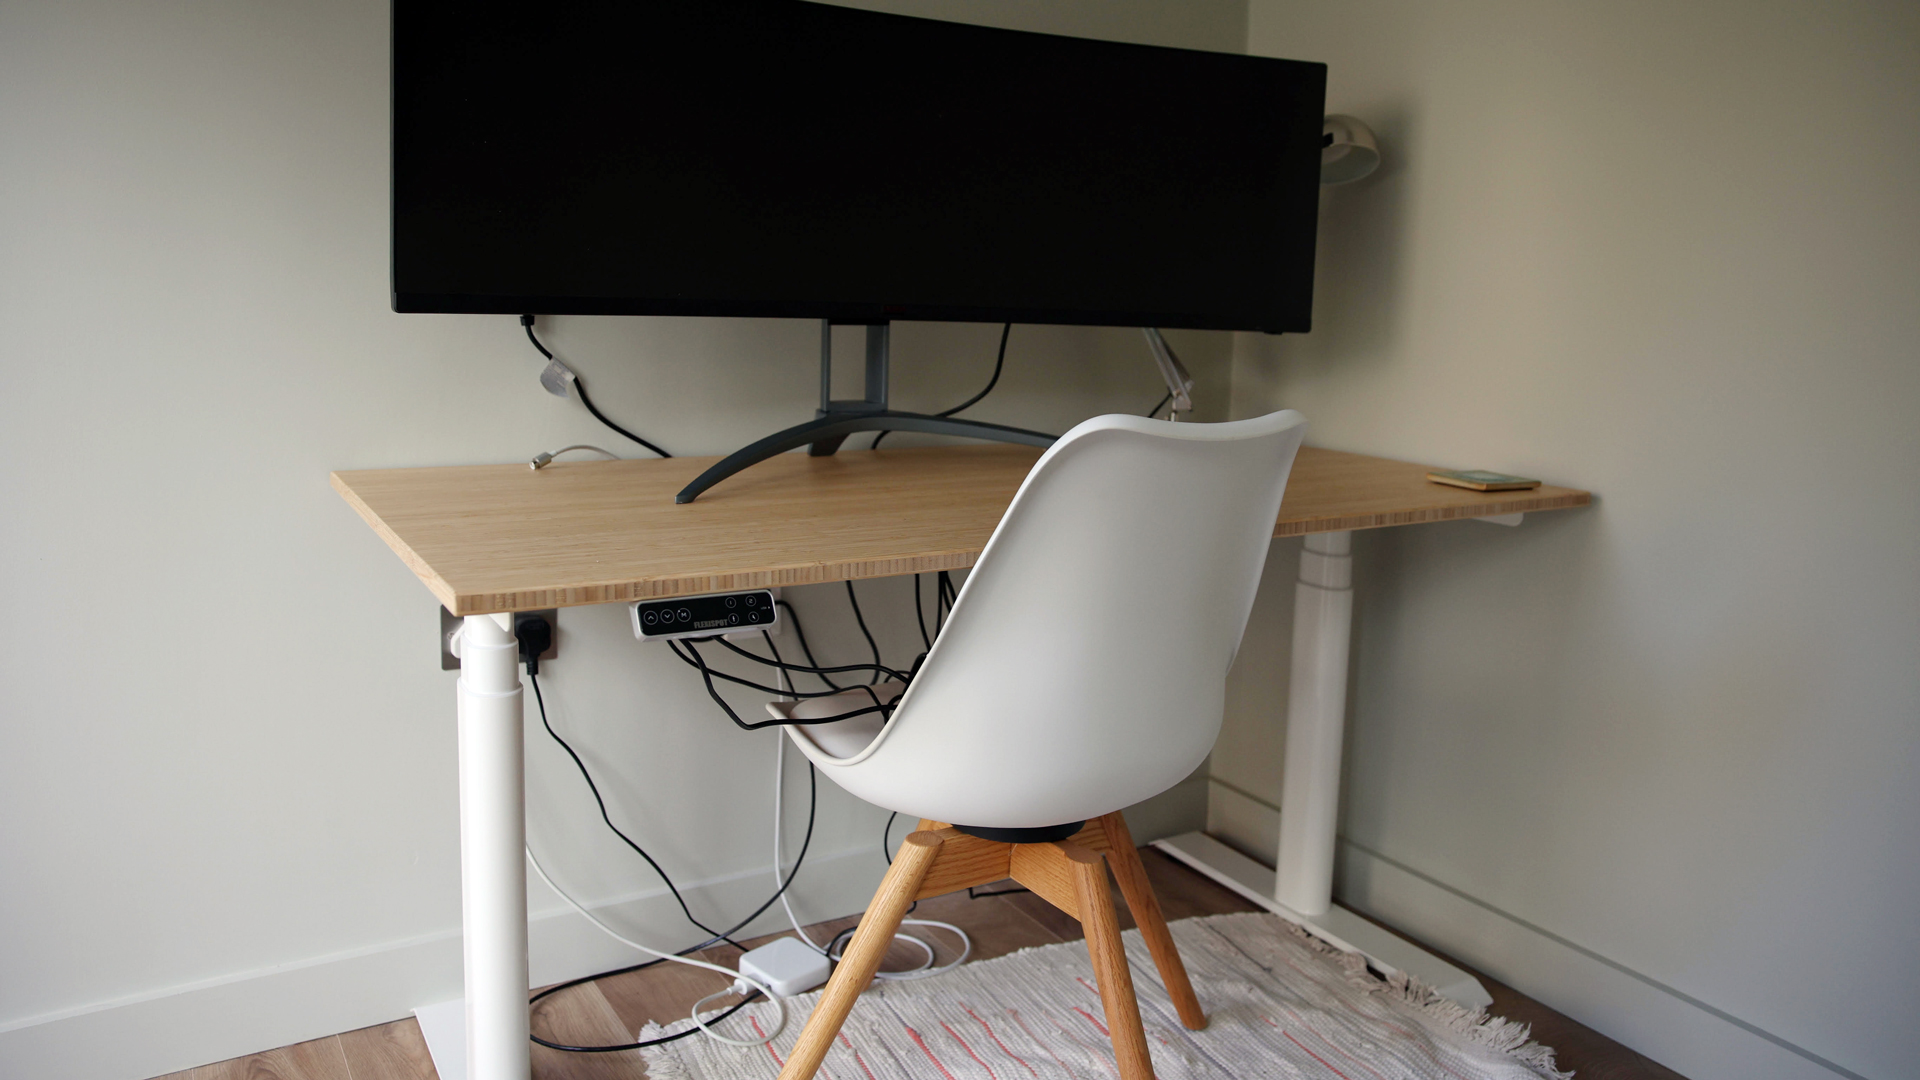 Flexispot E8 Standing Desk review image showing the desk from a diagonal angle with a monitor on it and a chair set up.